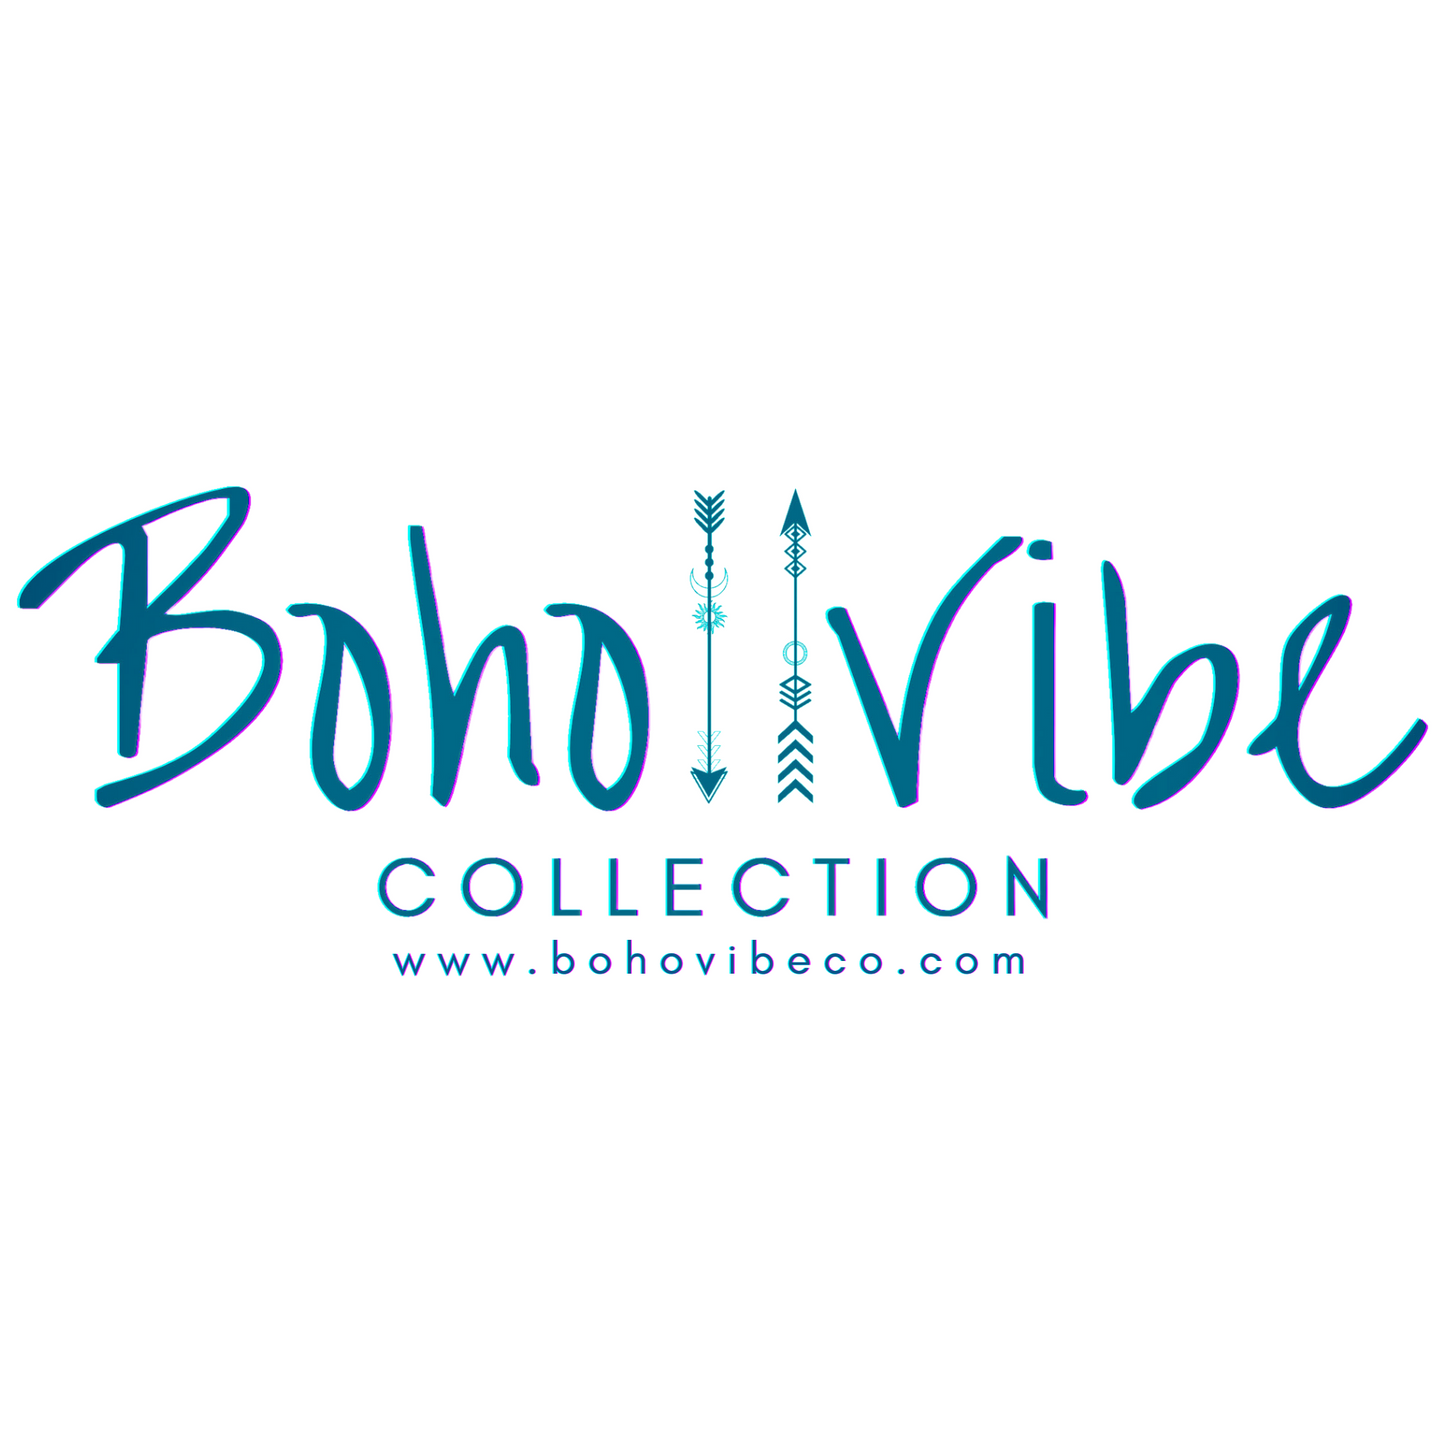 Boho ↡↟ Vibe Collection ↠ The Wild Unknown Archetypes Deck and Guidebook